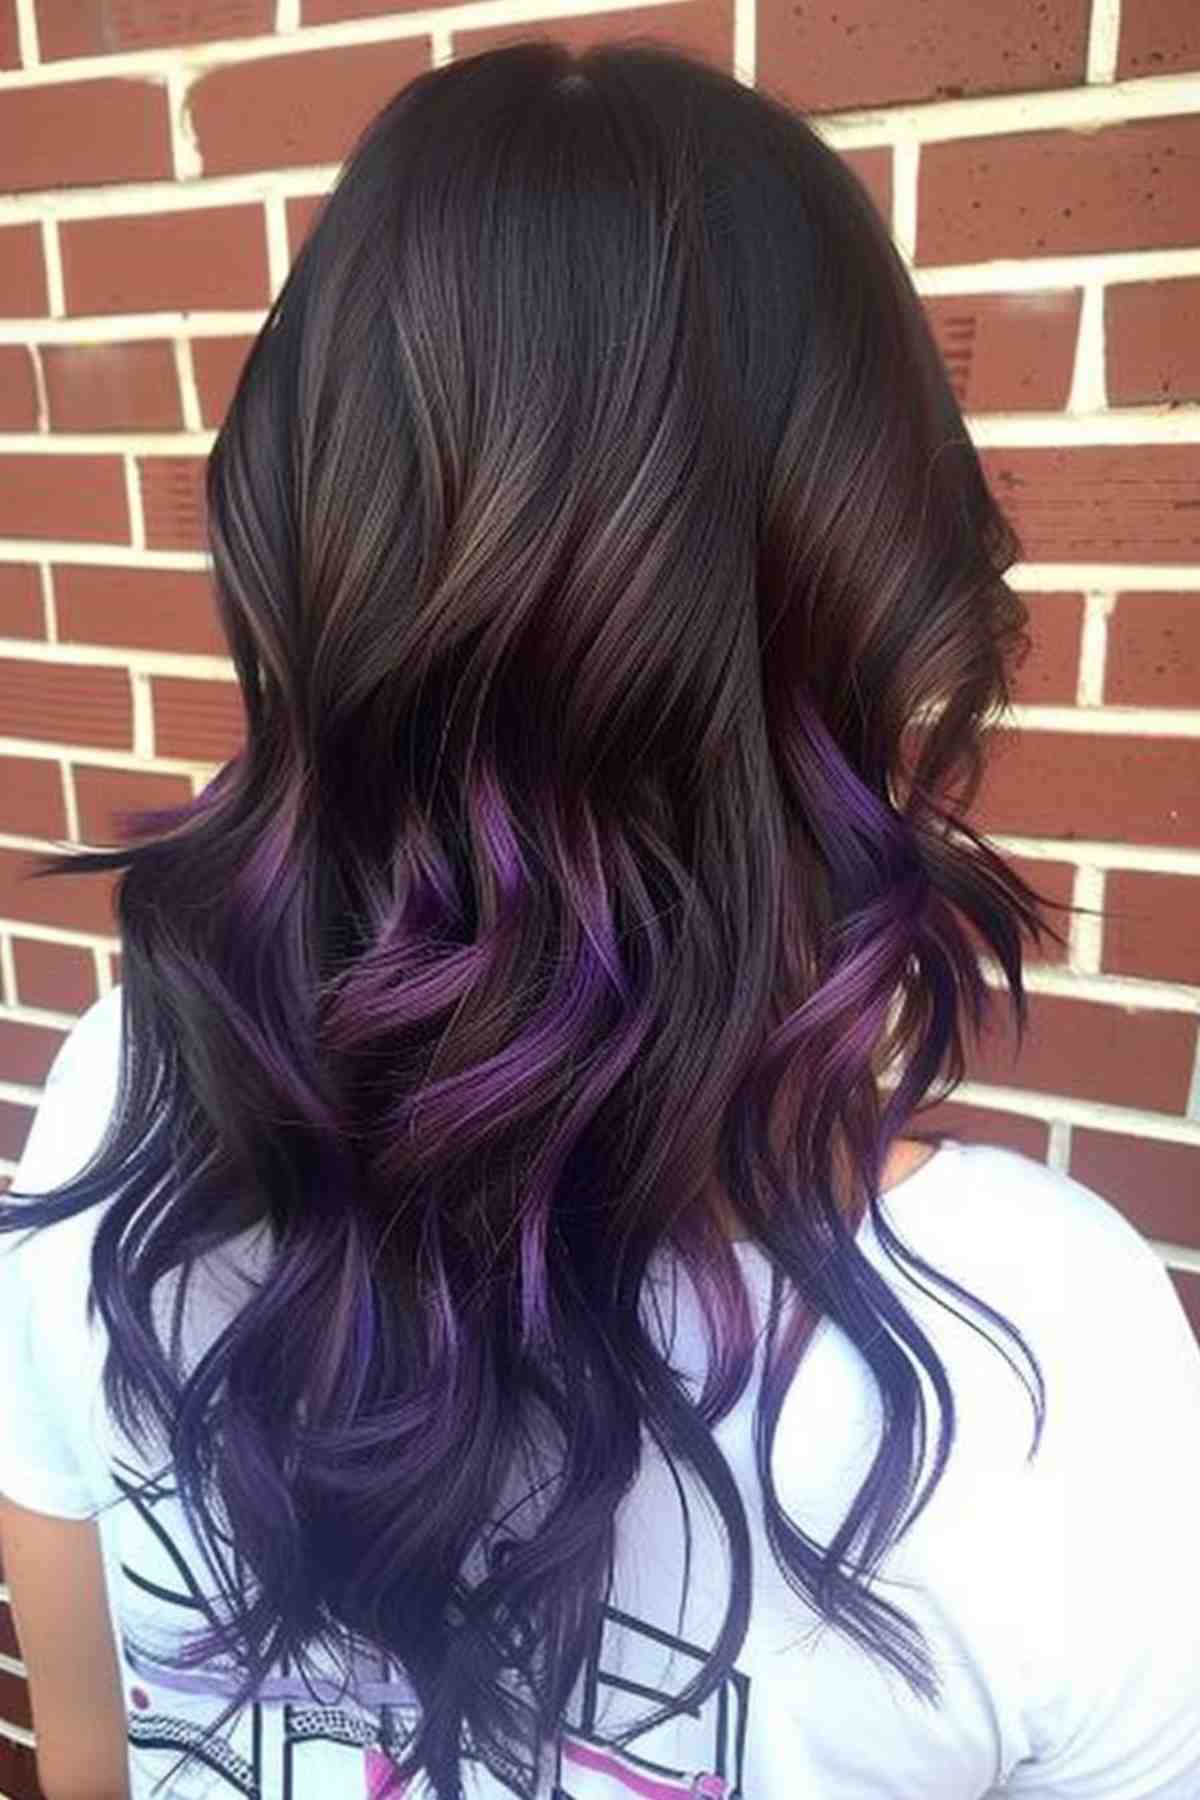 23 Stunning Purple Ombre Hair Color Ideas for 2023